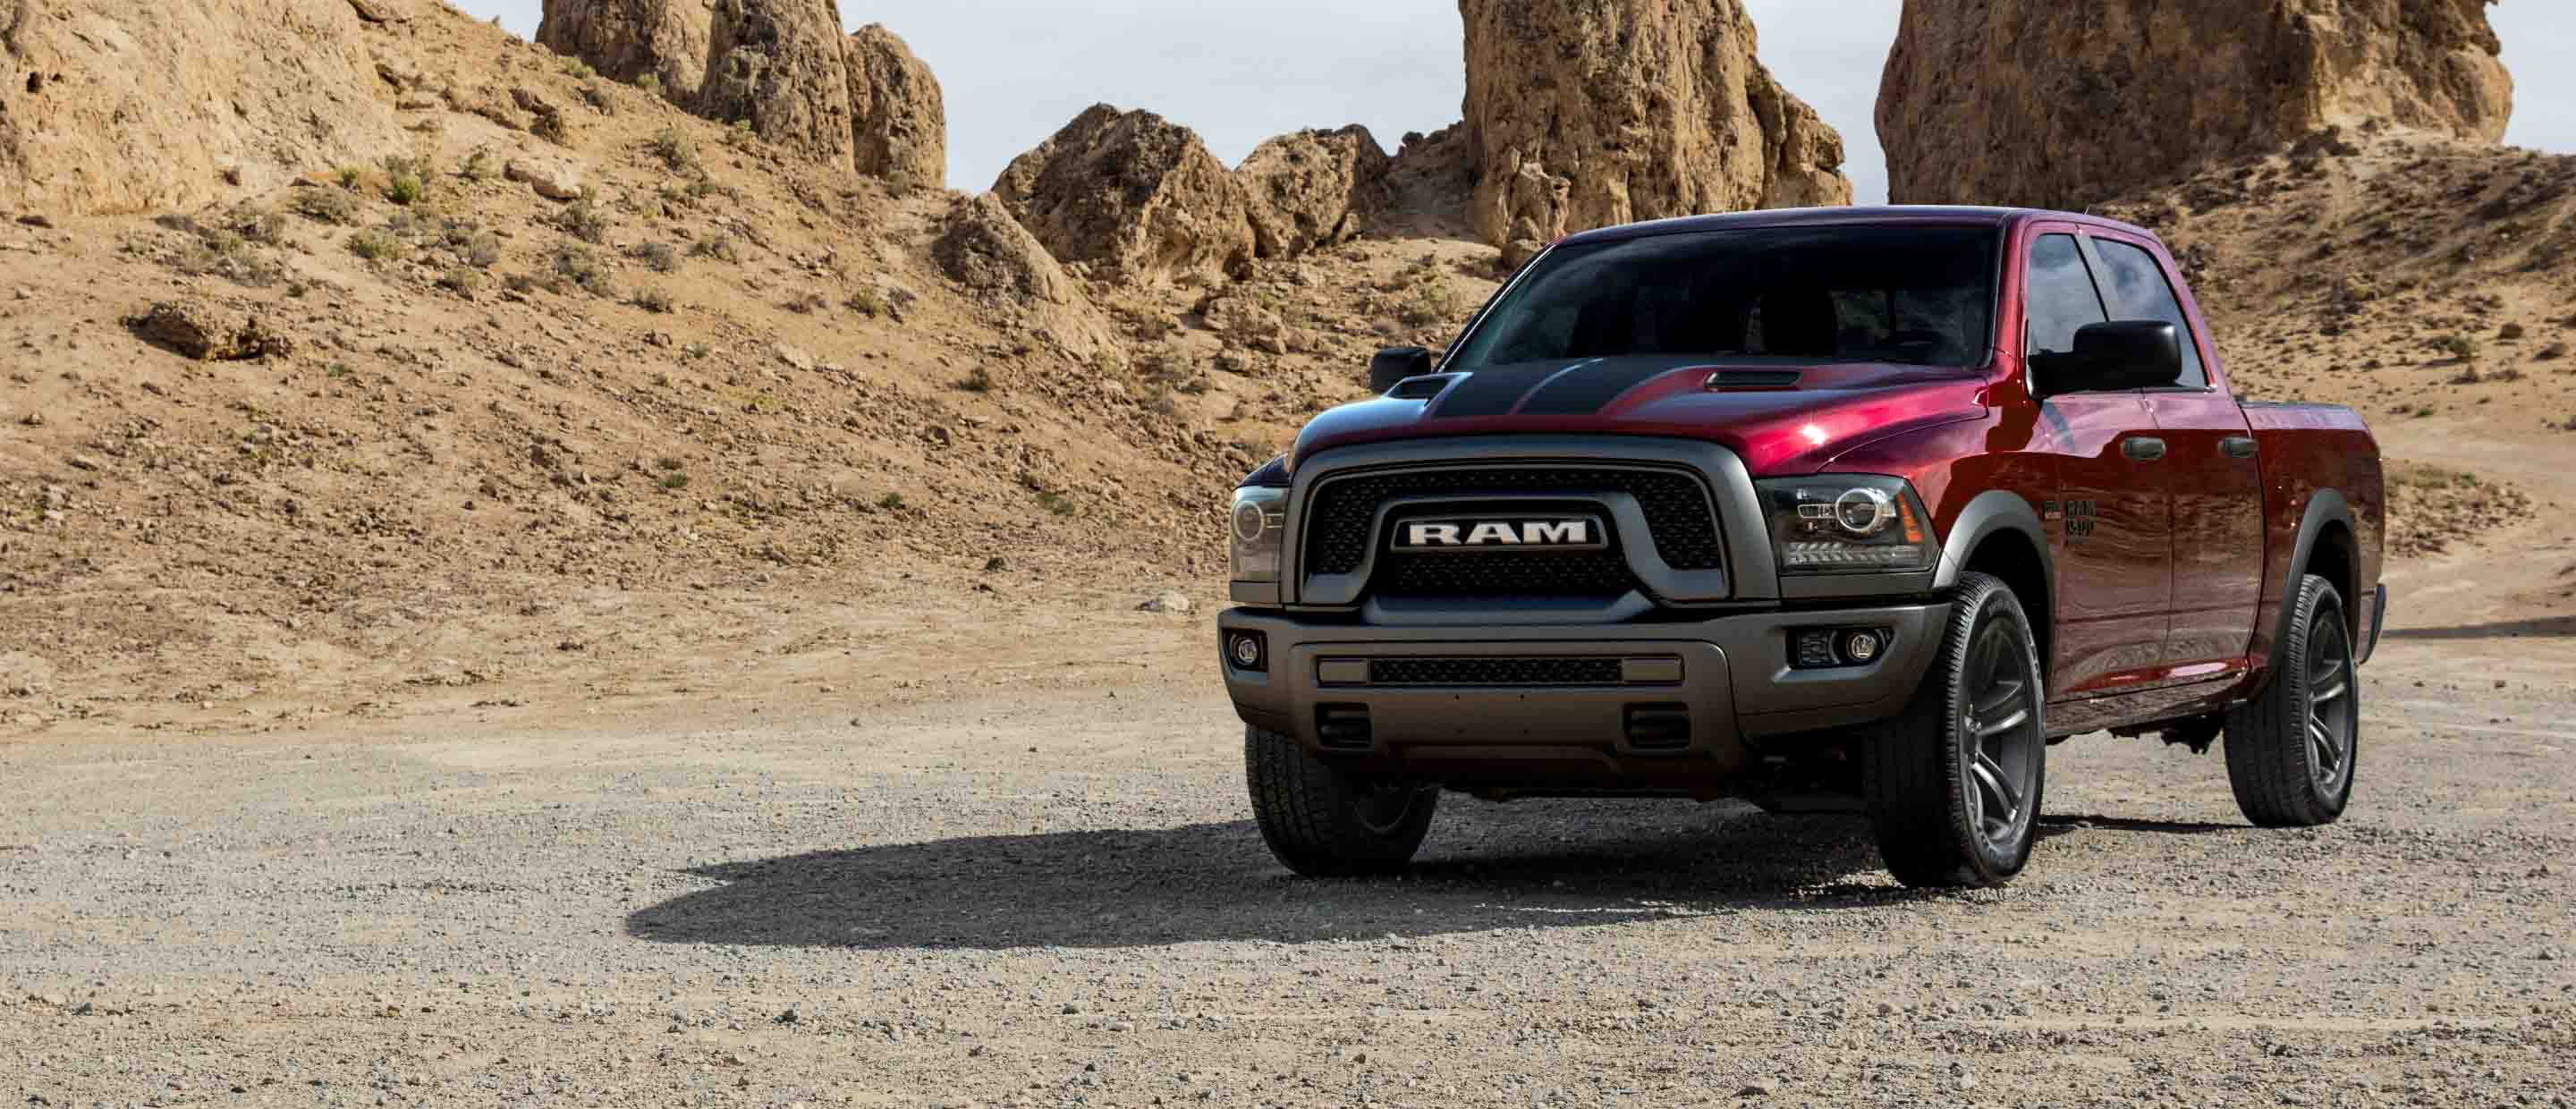 The 2022 Ram 1500 Classic parked on a twisting desert road with rocky outcroppings in the distance.